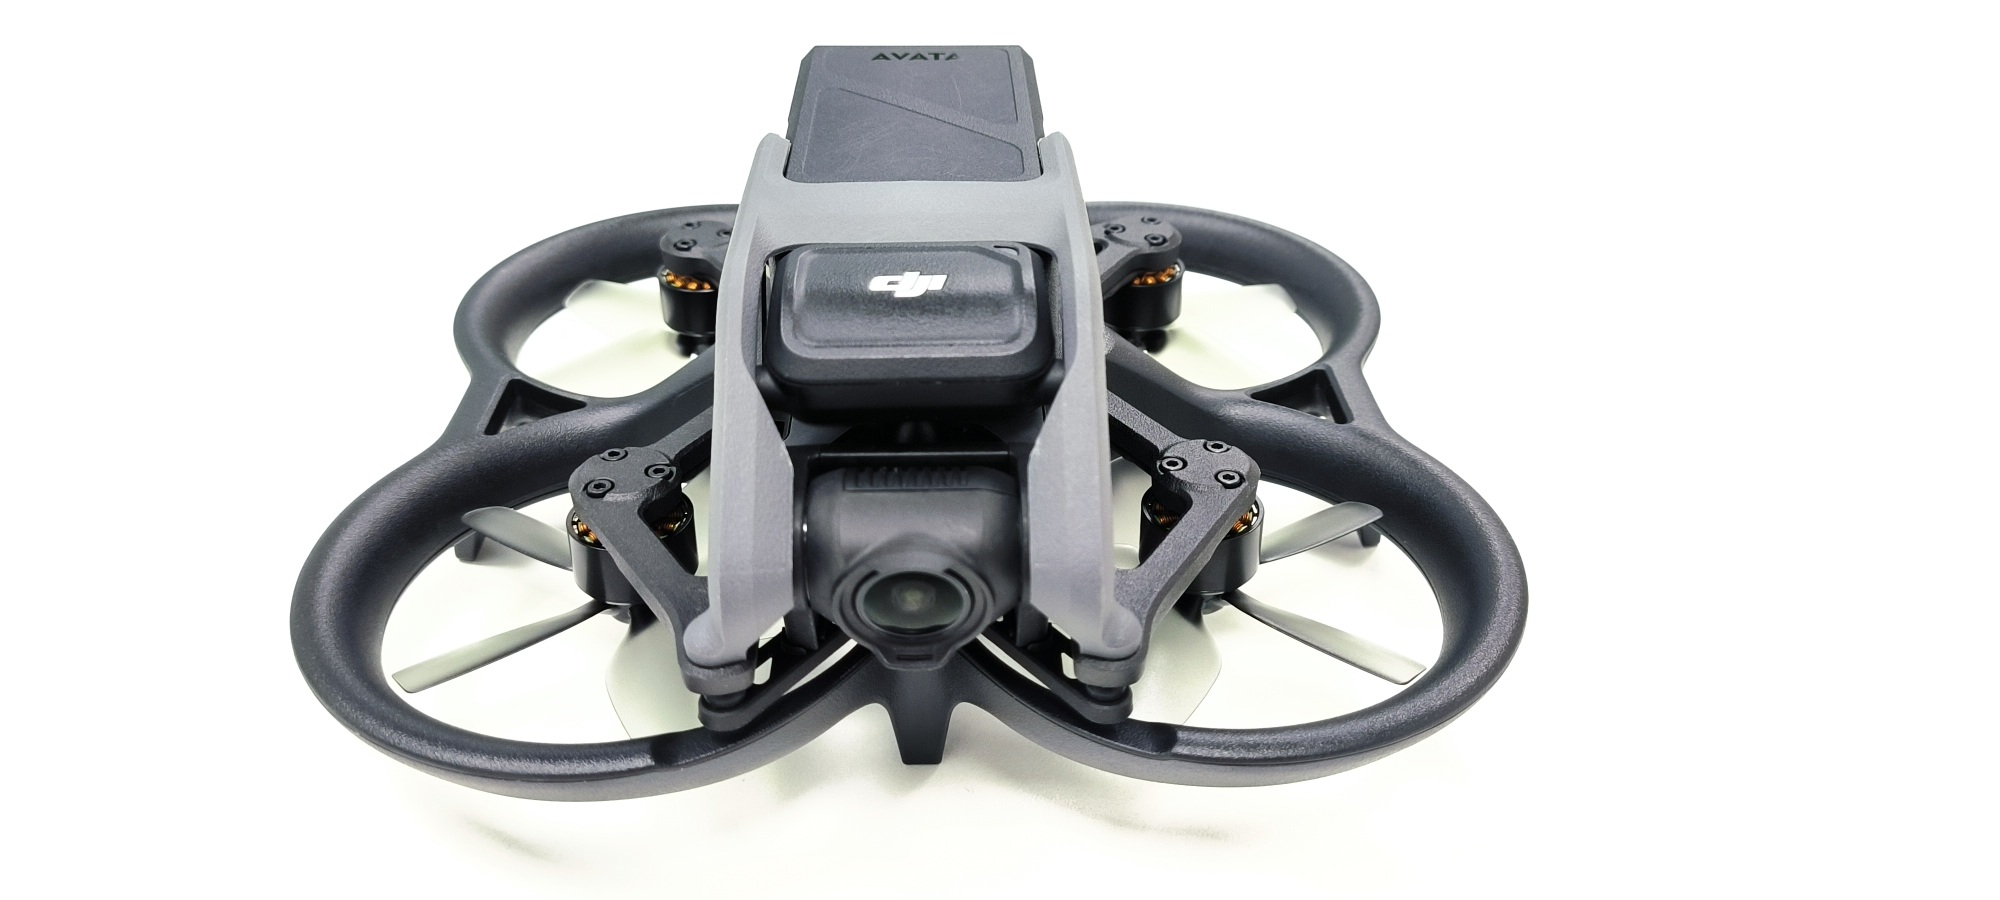 DJI Avata Pricing And Specifications You Wanted To Know